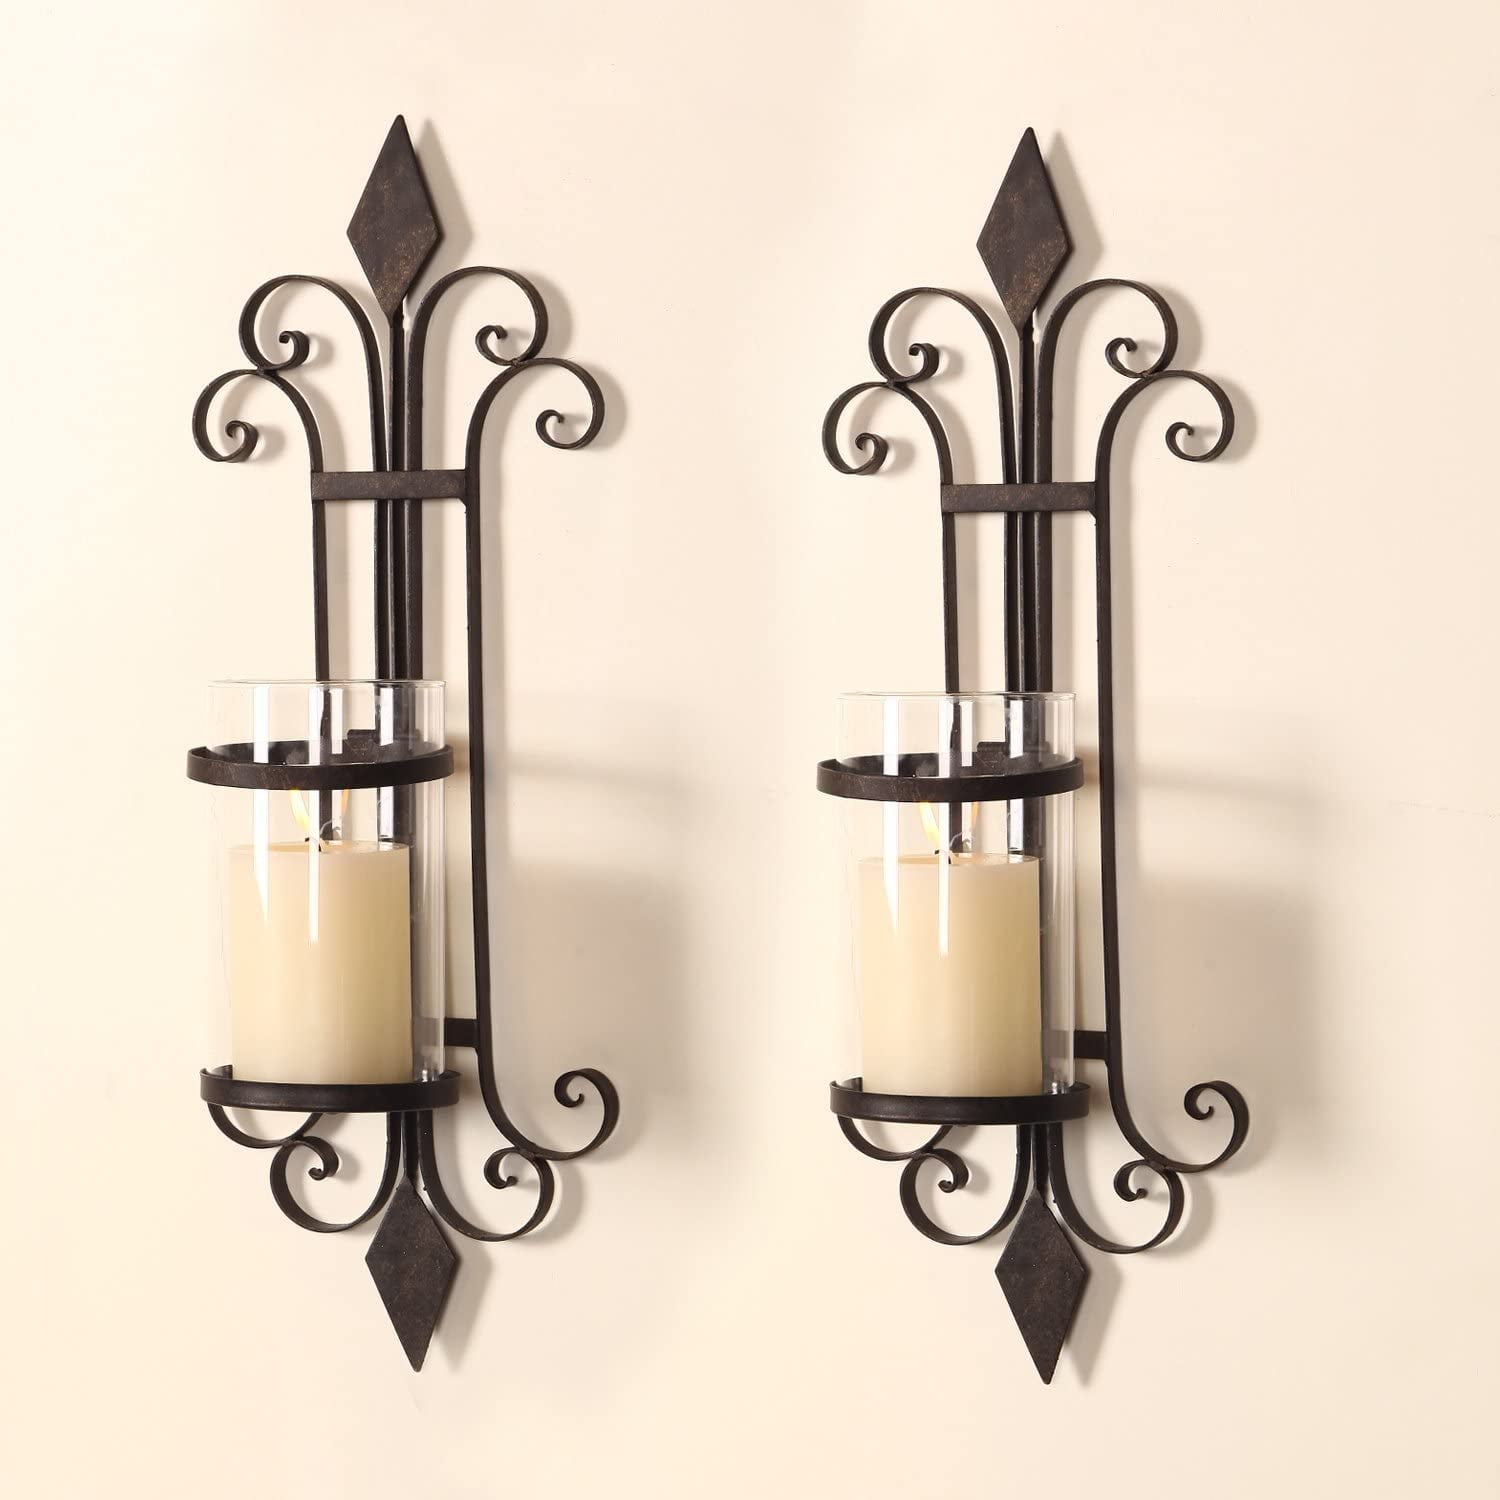 Adeco Single Pillar Wall Hanging Candle Holder Sconce (Set of 2) Brown 